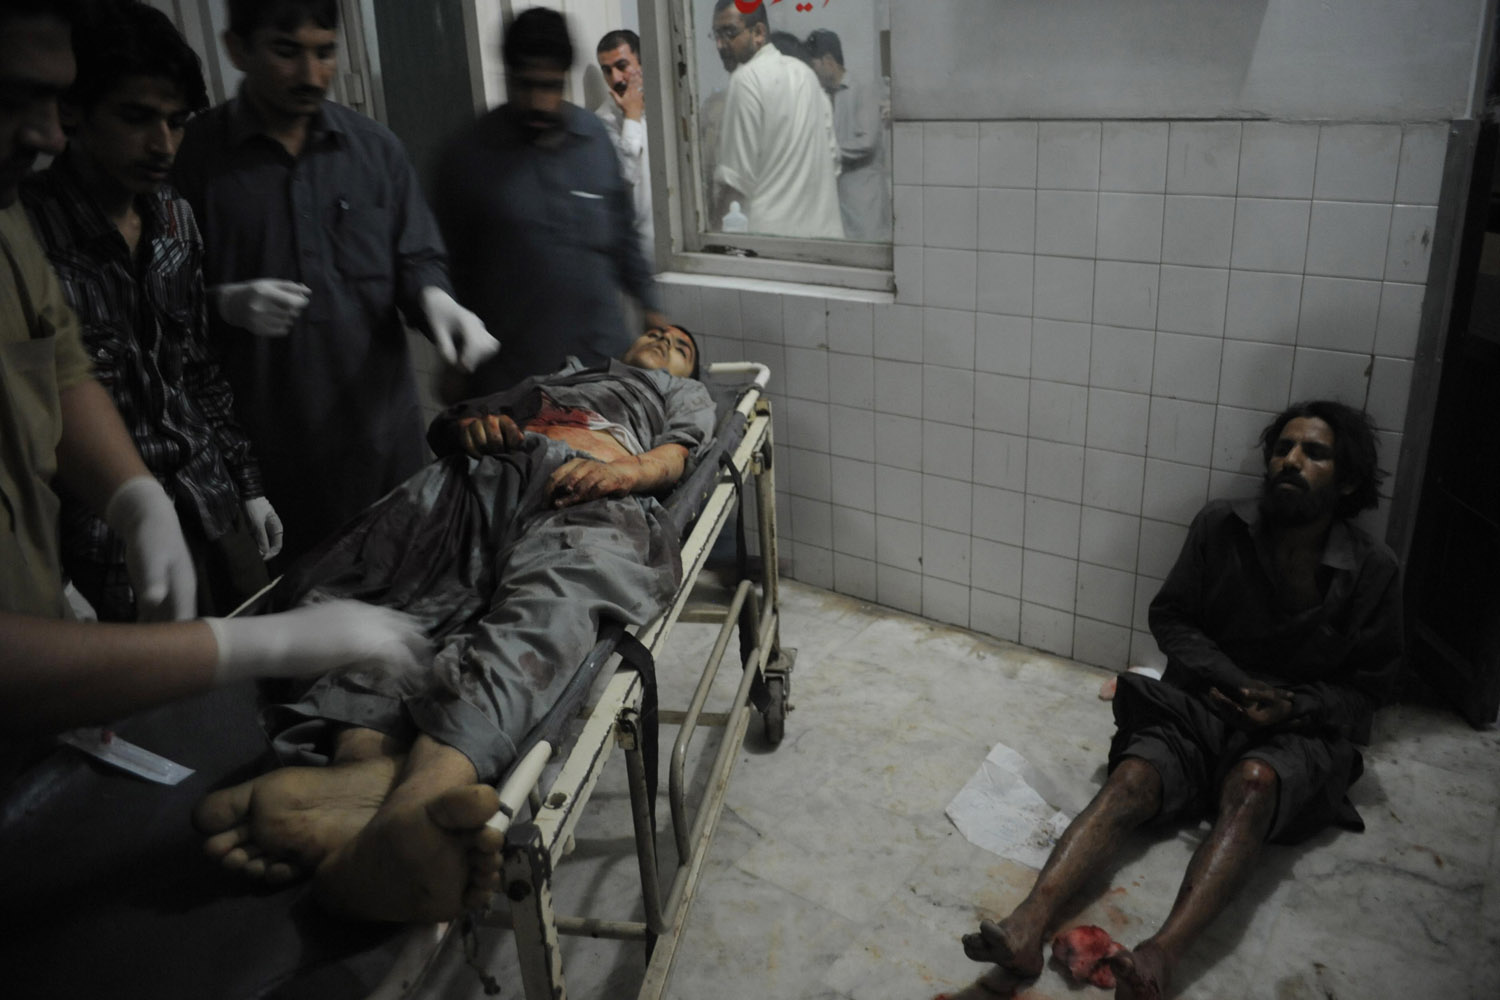 April 16, 2013. Pakistani paramedics treat an injured blast victim as an other victim waits for treatment at a hospital following a suicide bomb attack on a election campaign rally in Peshawar.